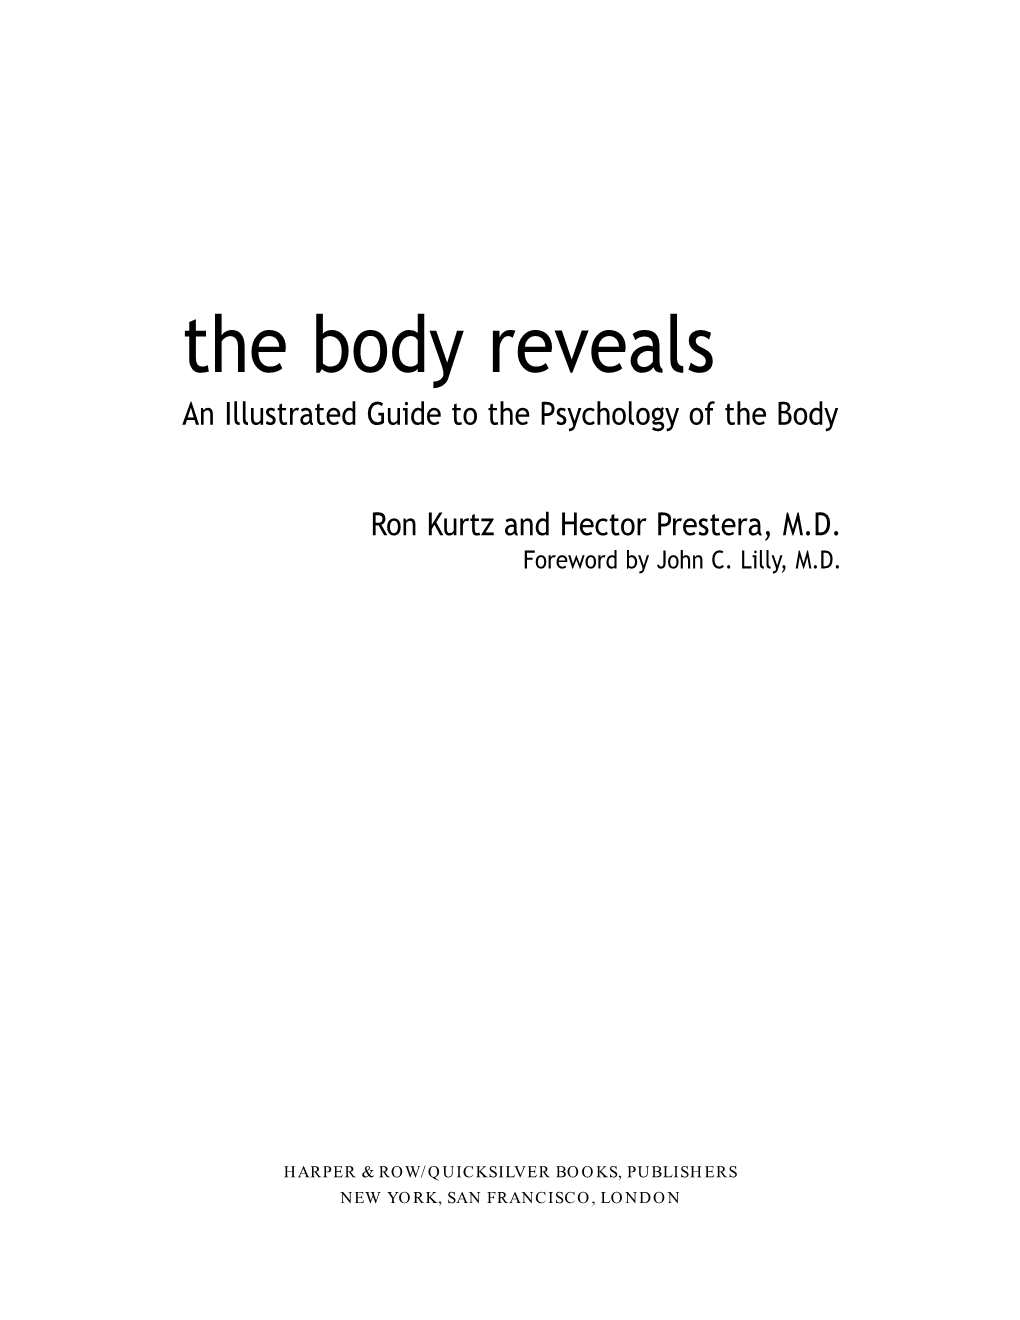 The Body Reveals an Illustrated Guide to the Psychology of the Body